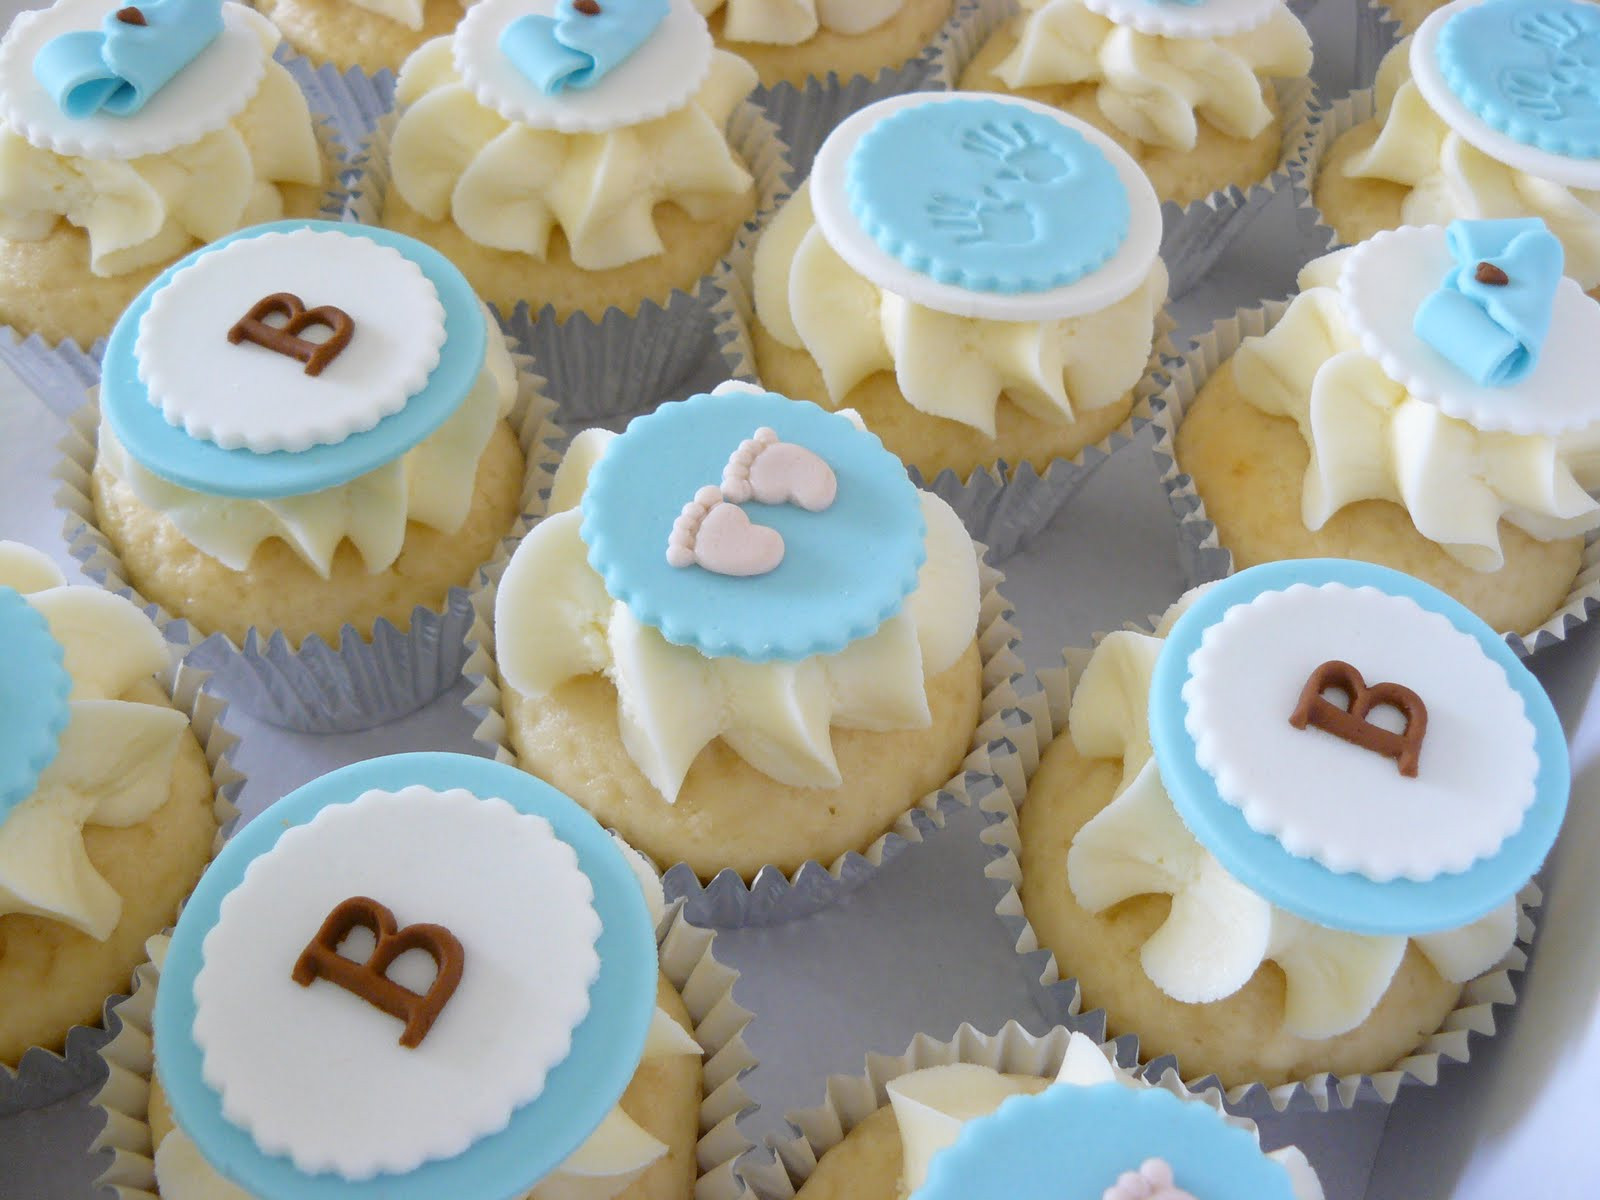 Baby Shower Cupcakes Decorations
 70 Baby Shower Cakes and Cupcakes Ideas